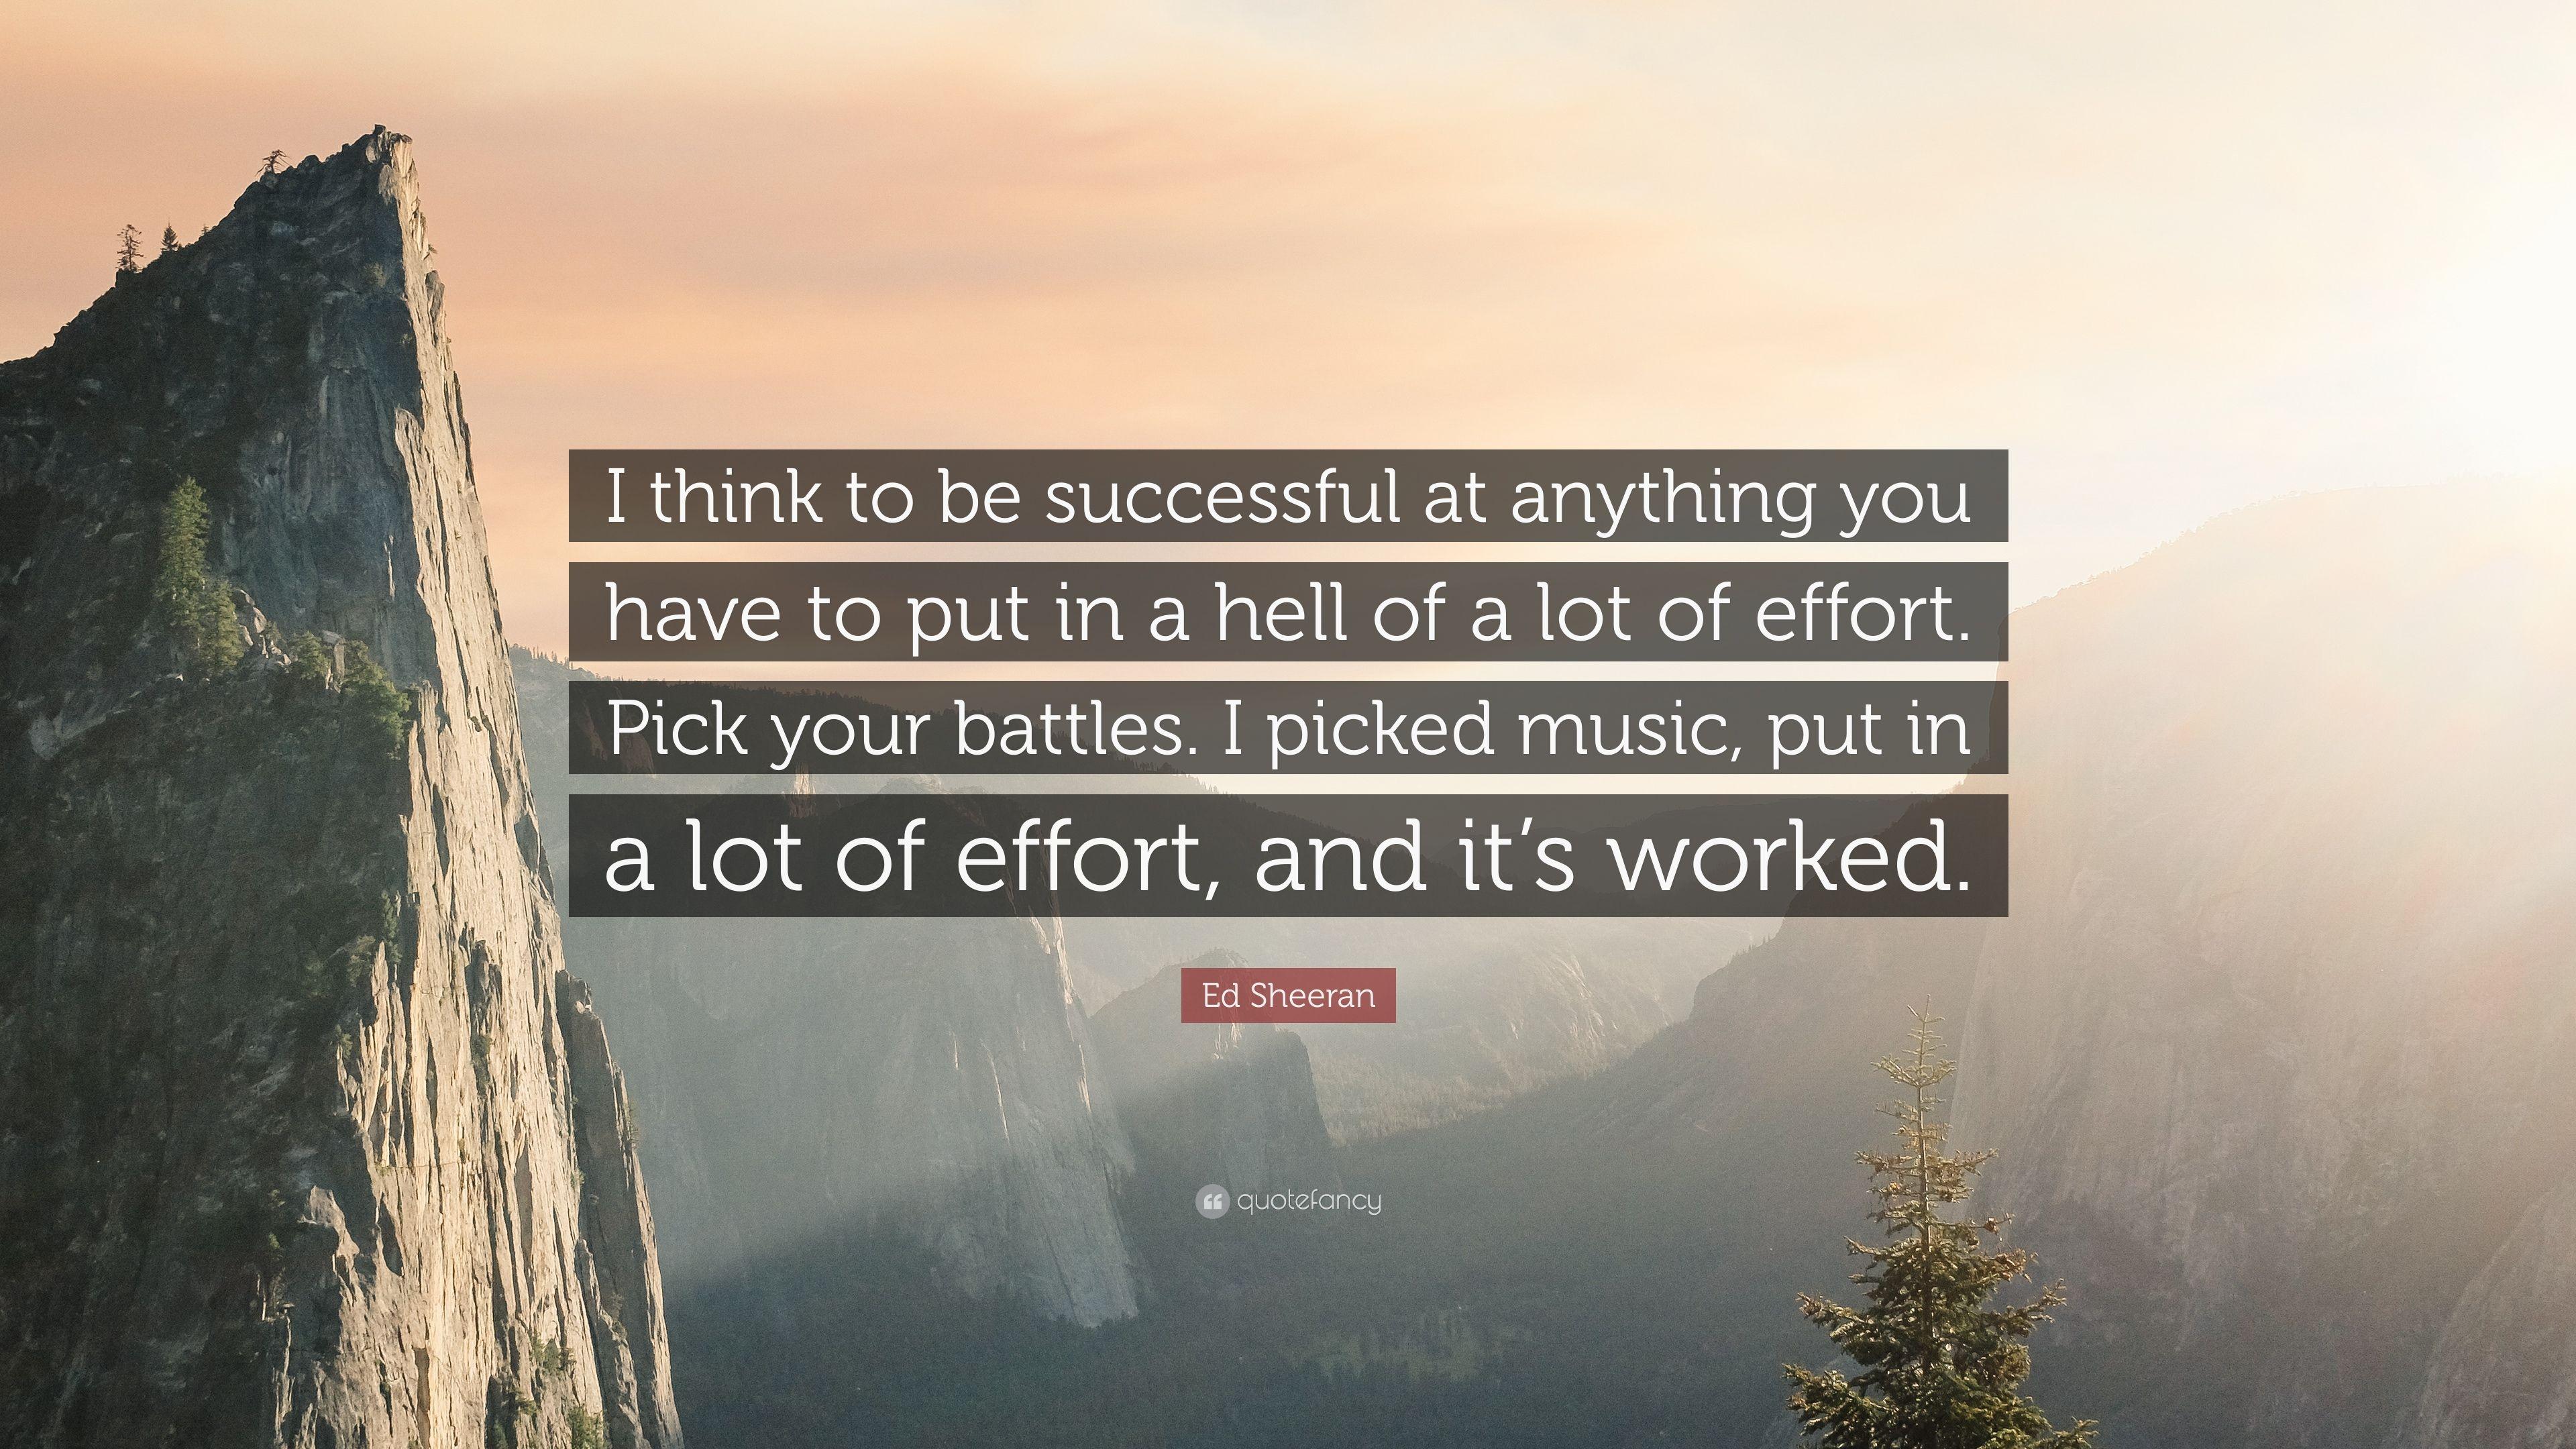 Ed Sheeran Quote: “I think to be successful at anything you have to